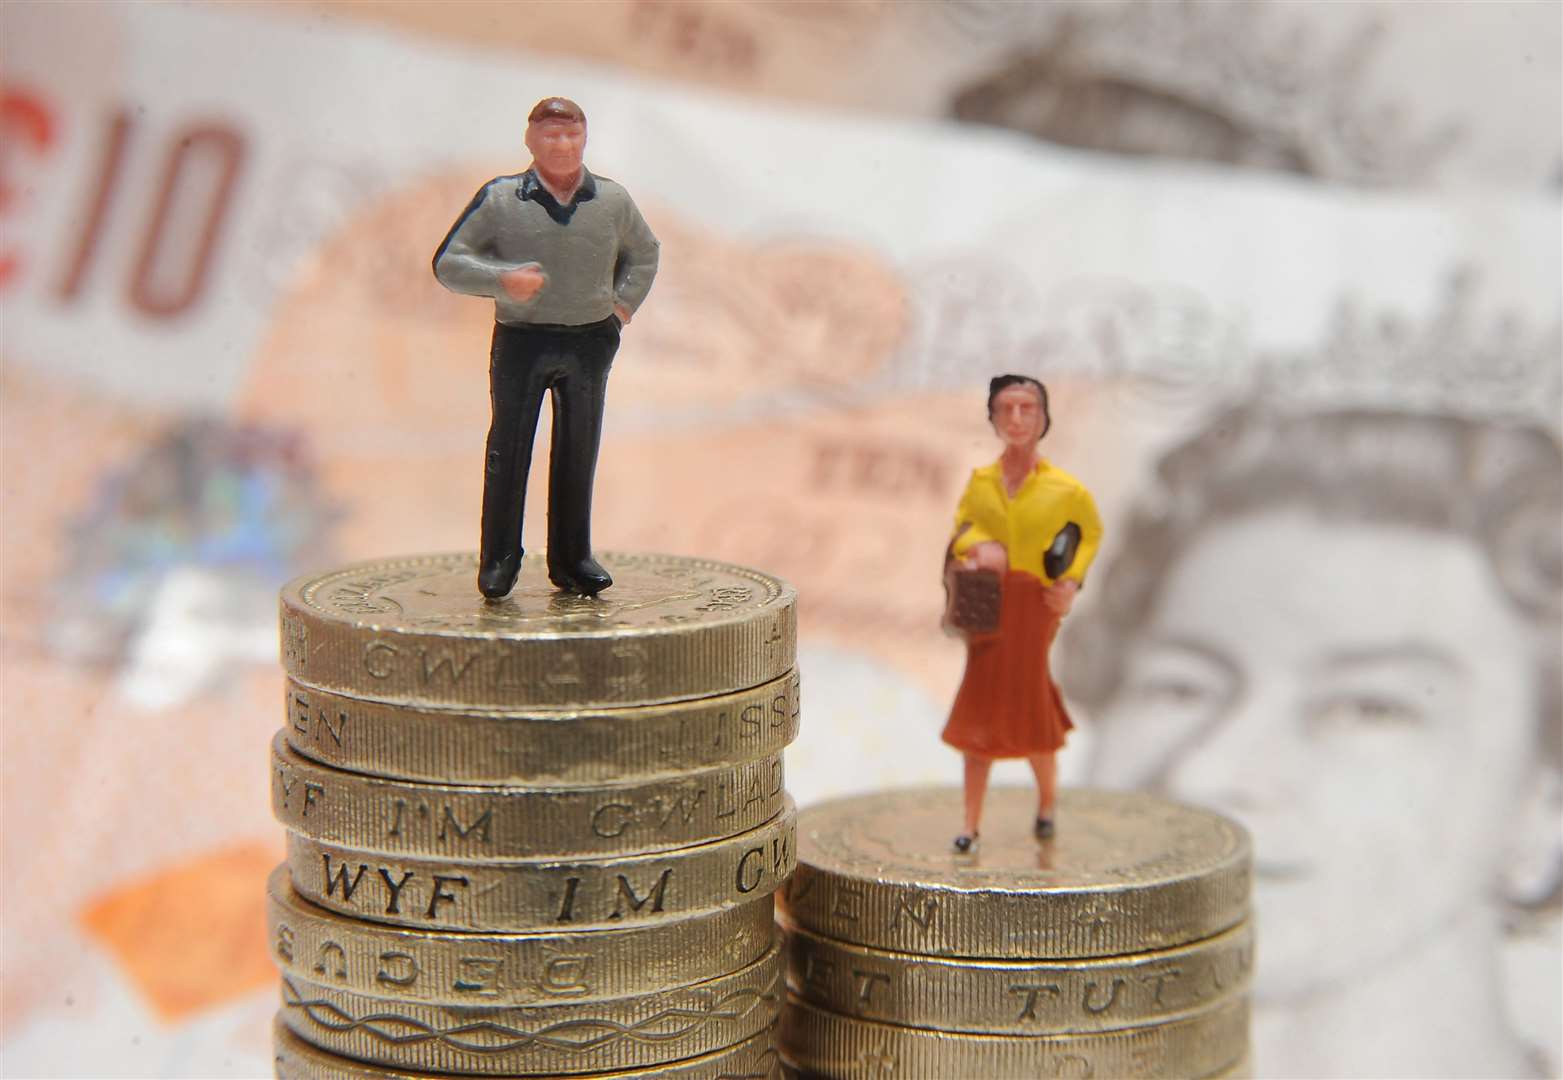 Since 2017 all companies with more than 250 employees must publish gender pay gap figures